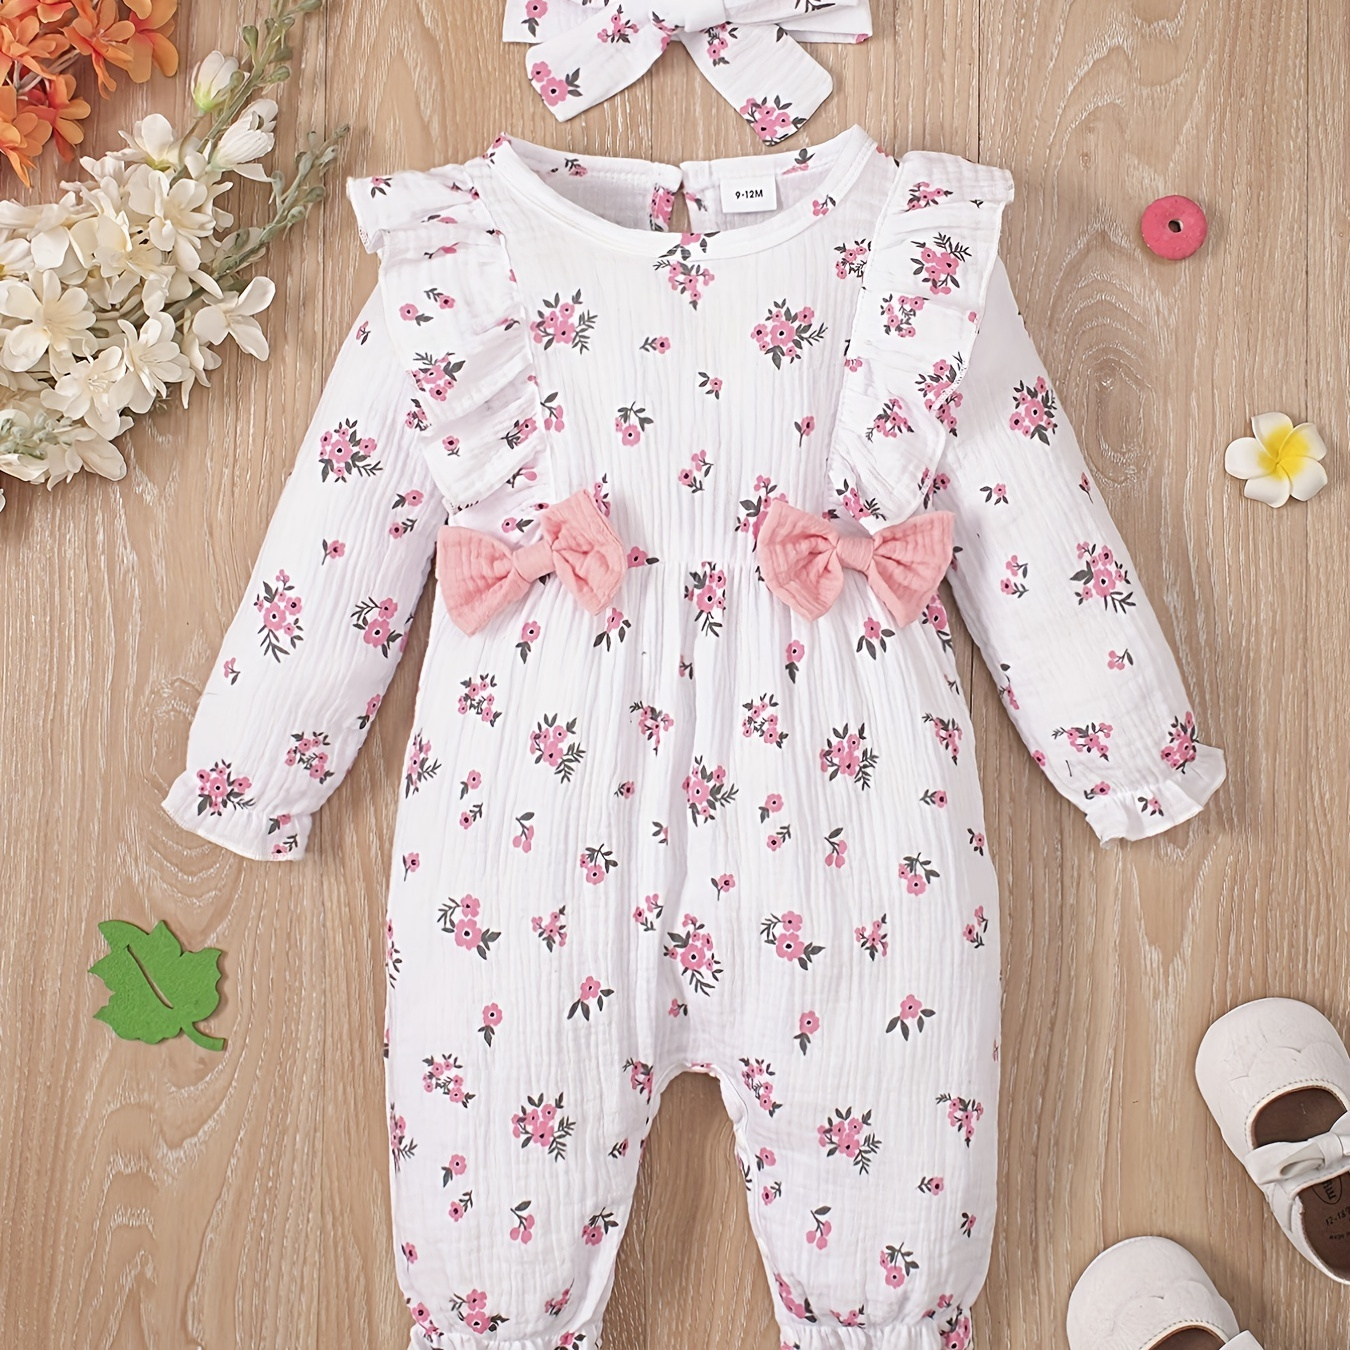 

Infant Baby Girls Casual Elegant Pure Cotton Muslin Romper, Newborn Floral Print Long Bodysuit, Casual Clothes